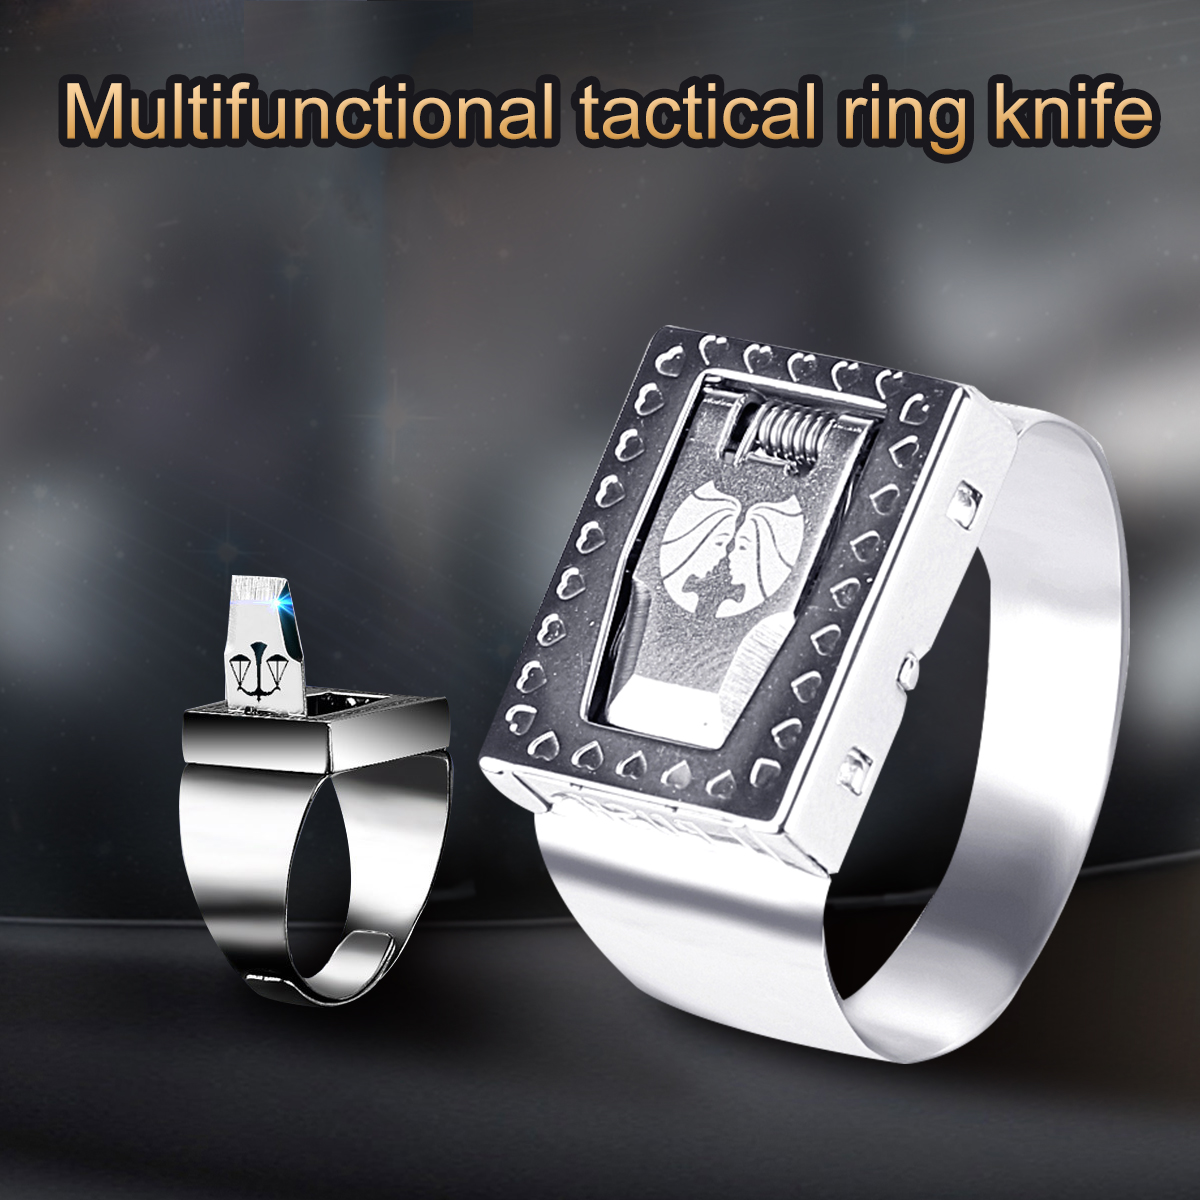 12-Constellation-Self-Protection-Ring-Body-Guard-Ring-Invisibility-Hidden-Ring-Blade-Emergency-Rescu-1423398-1